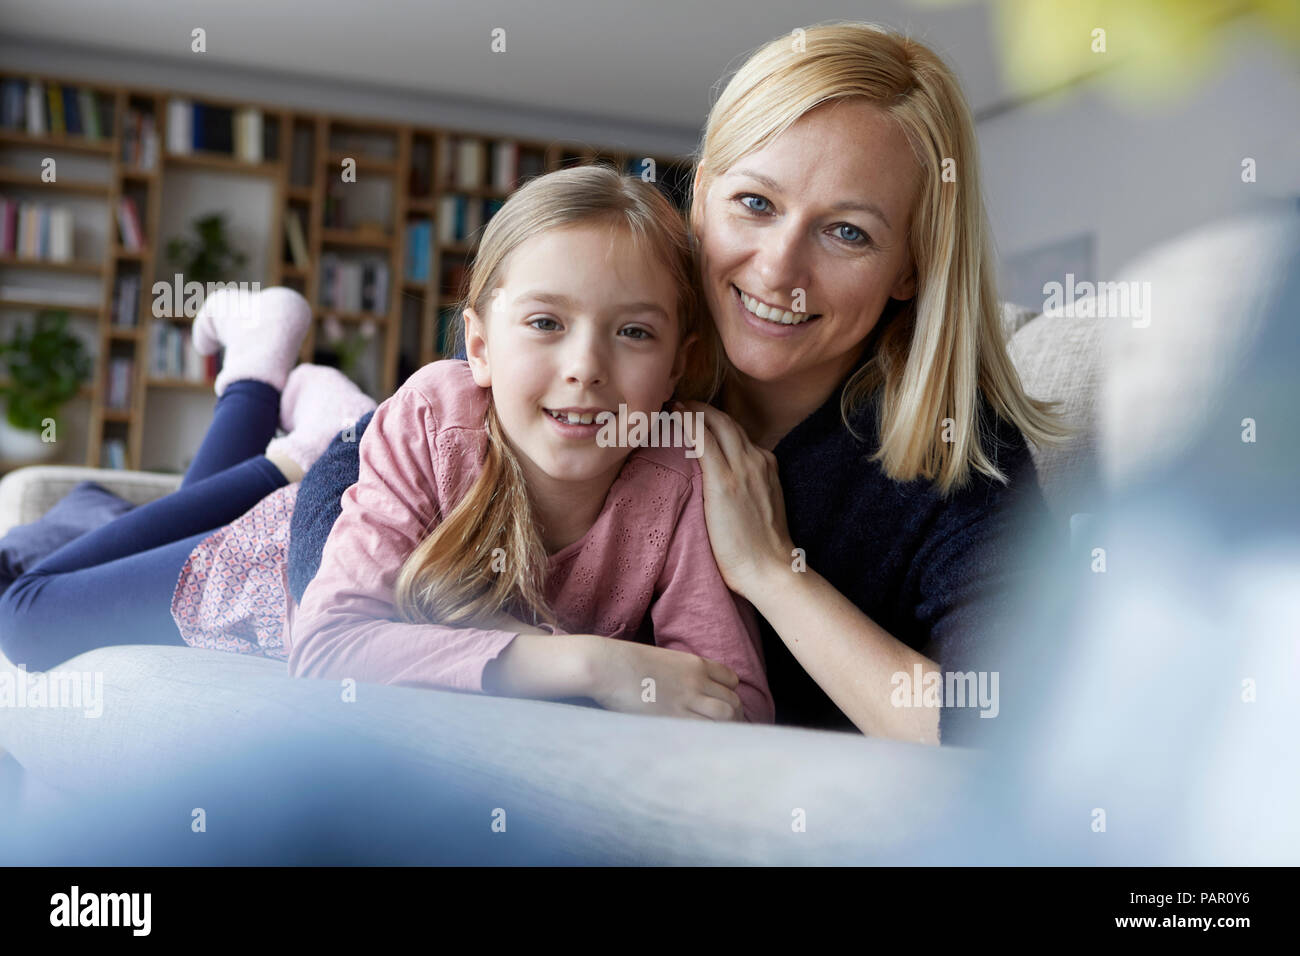 Mother and daughter having fun at home Stock Photo